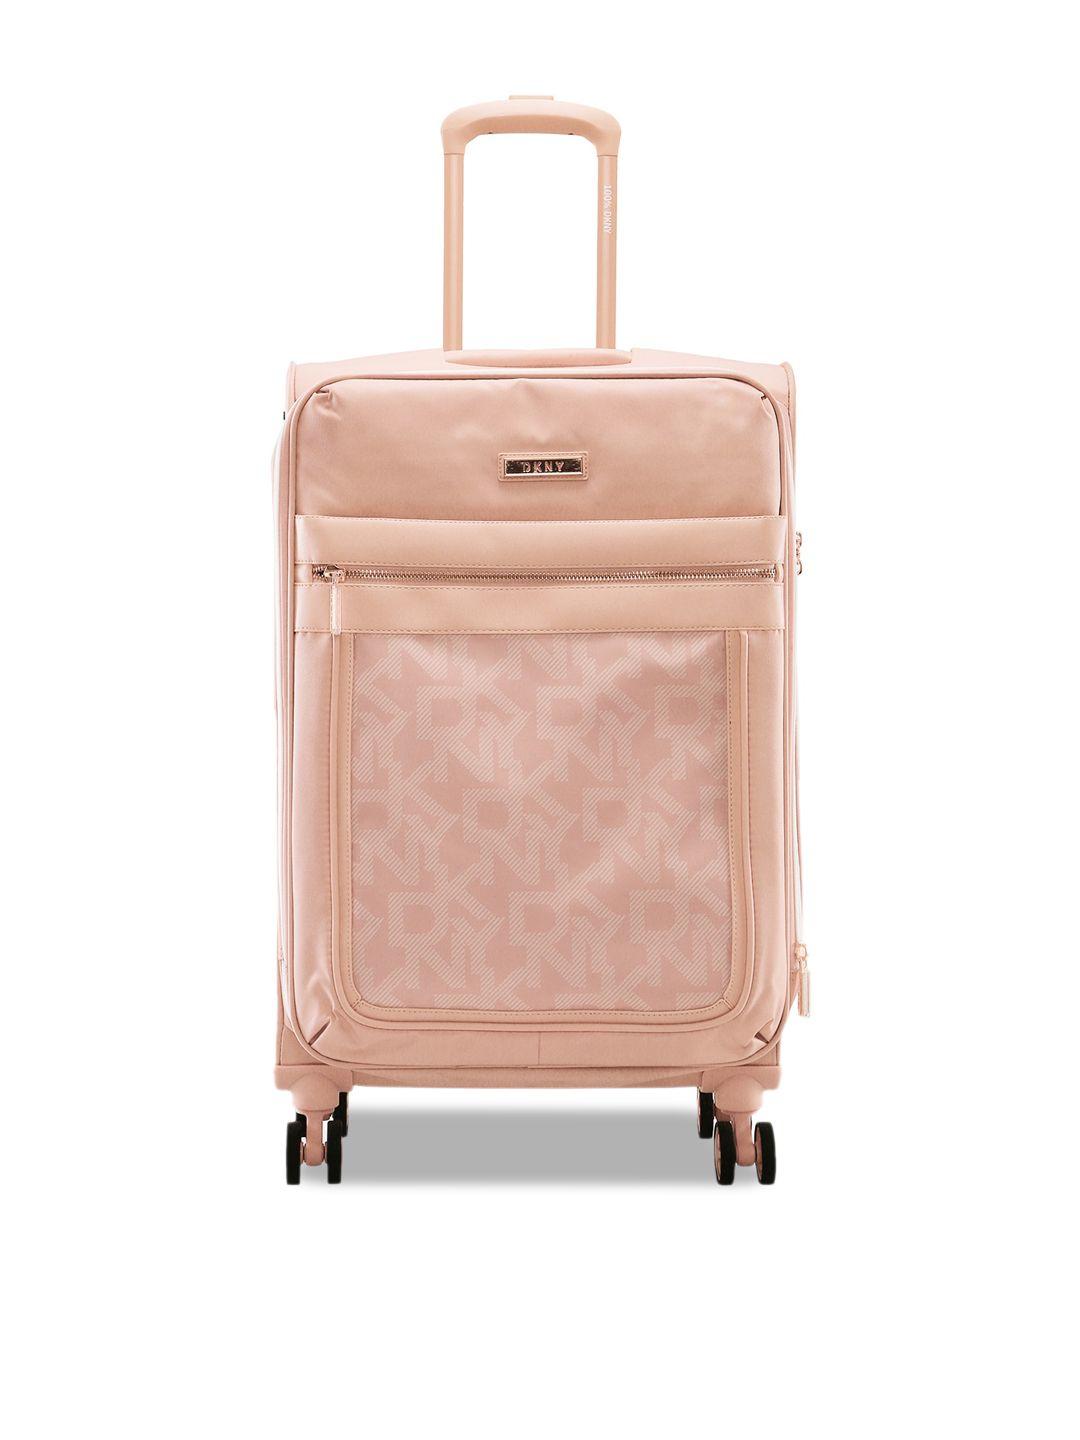 dkny after hours printed soft-sided medium trolley suitcase